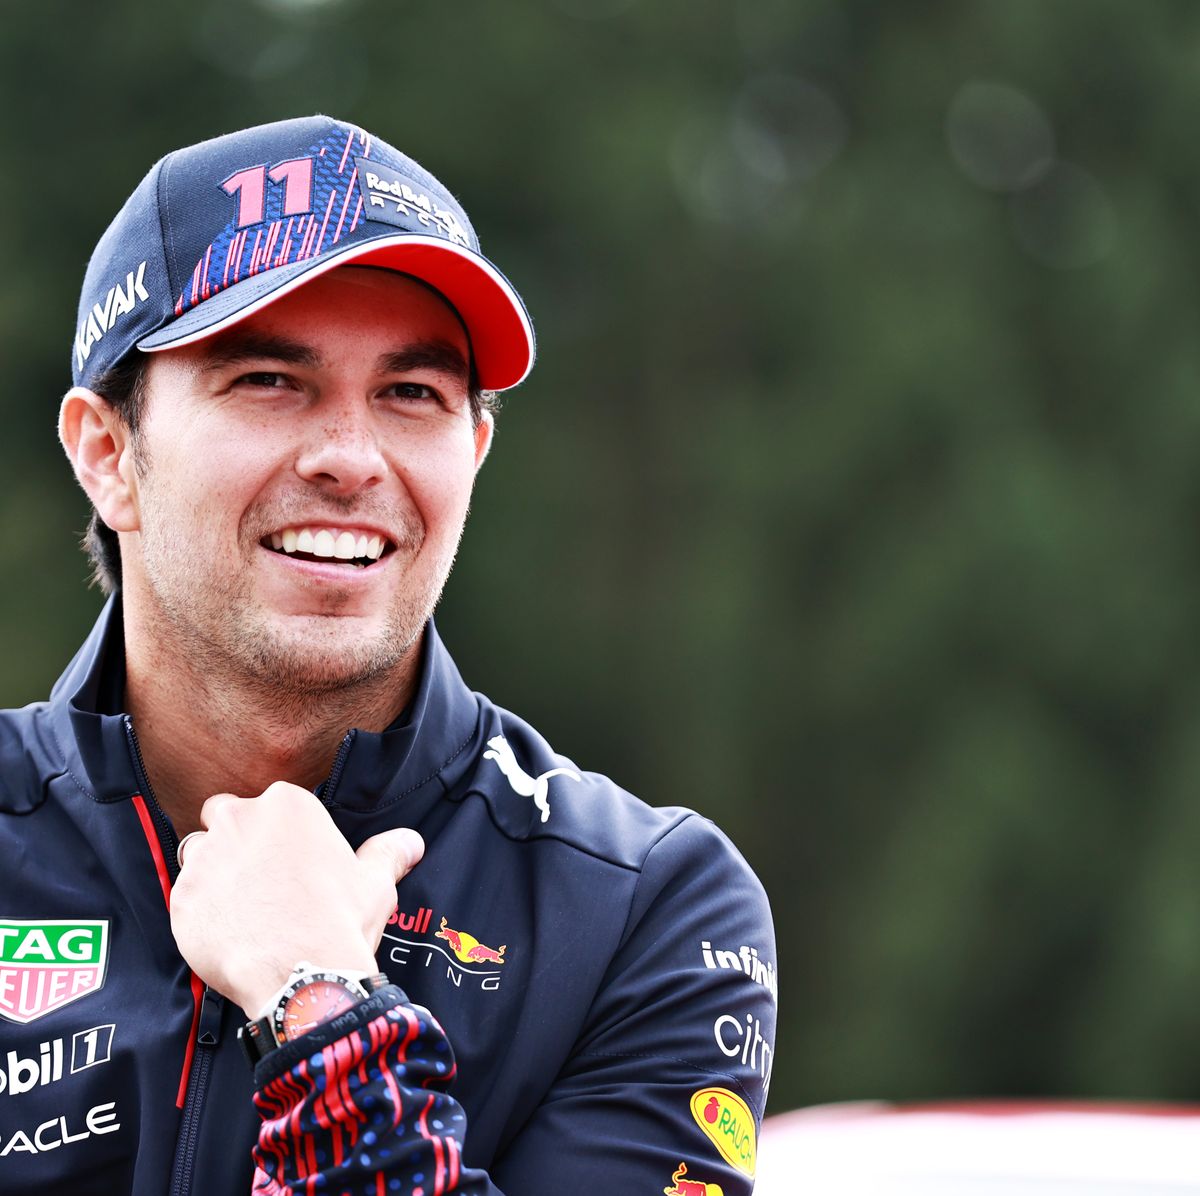 Checo Perez finds happiness outside the track, announces he will